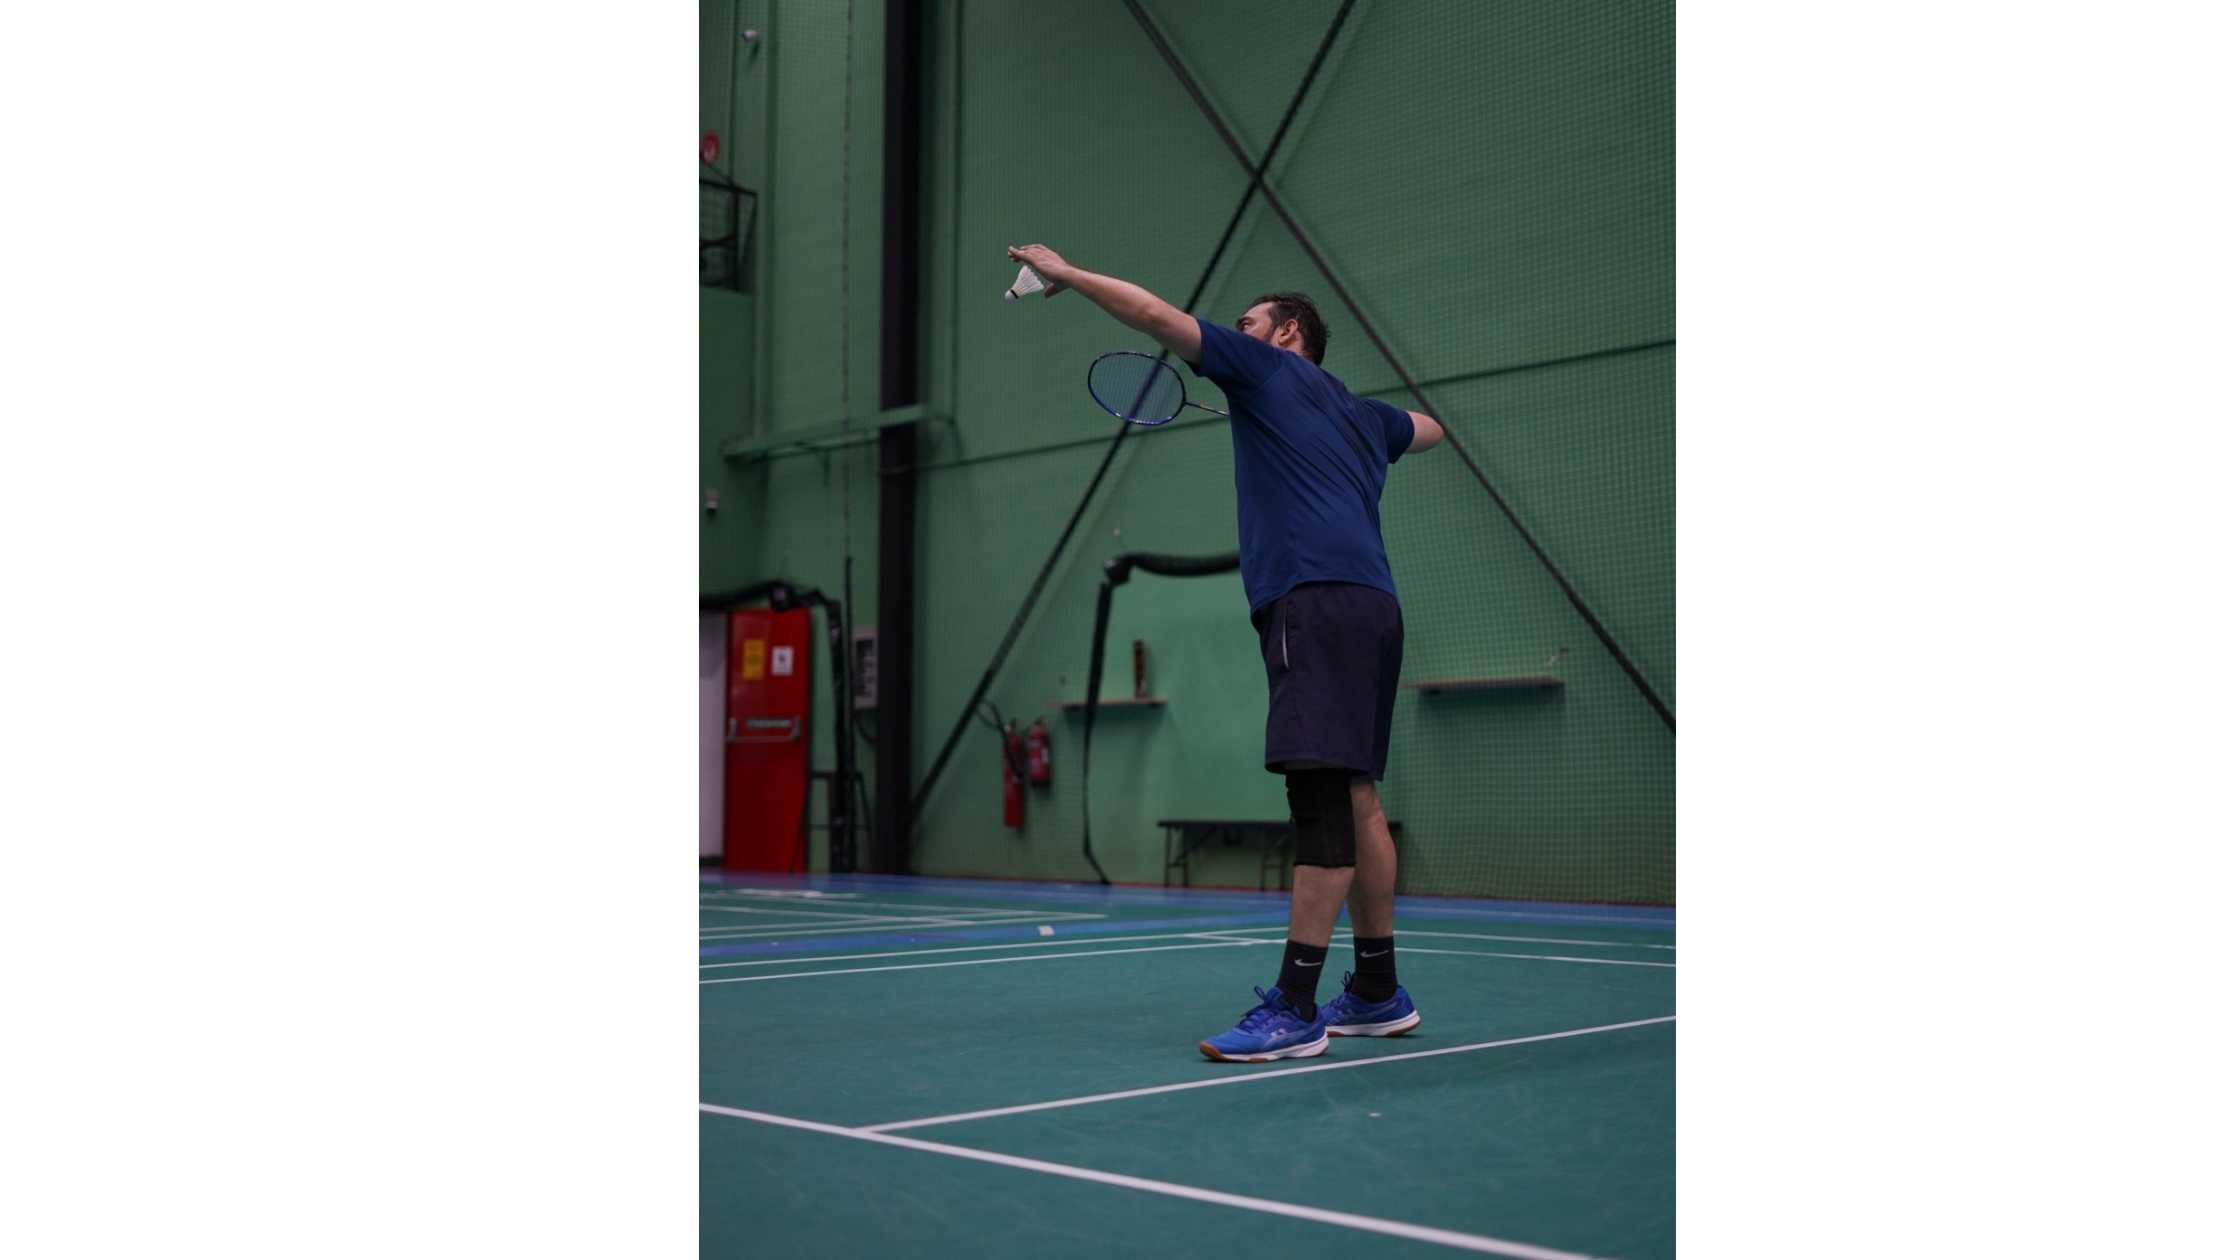 Why Badminton is Growing Popular in Dubai and How Coaches are Adapting: Explore how the interest in badminton is growing within Dubai's sports scene and how this impacts the coaching industry there.